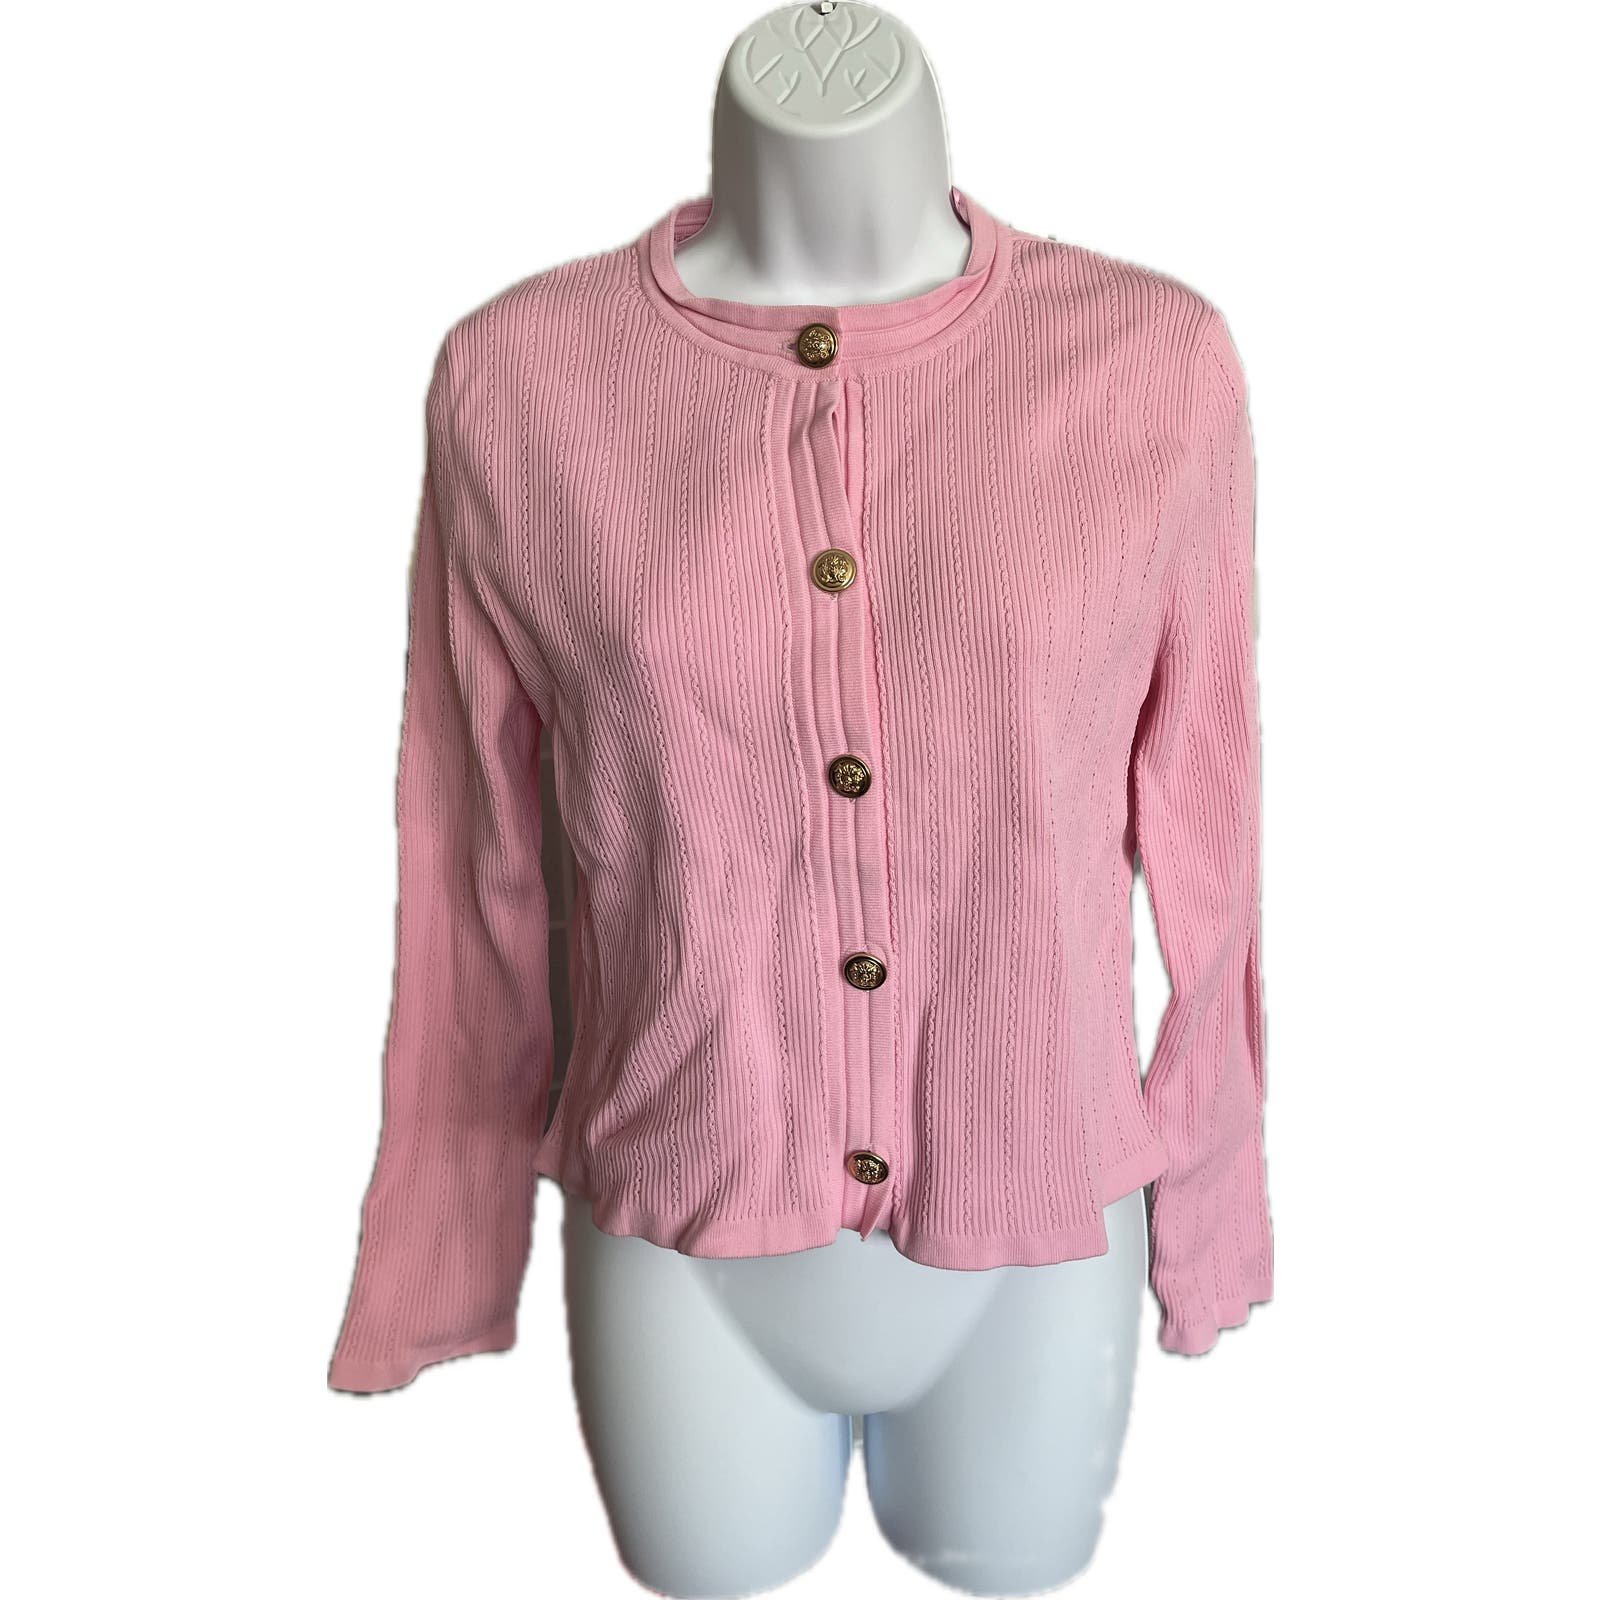 Exclusive Zara barbie baby pink ribbed cardigan gold buttons XL NWT OdJe1NqFt US Outlet